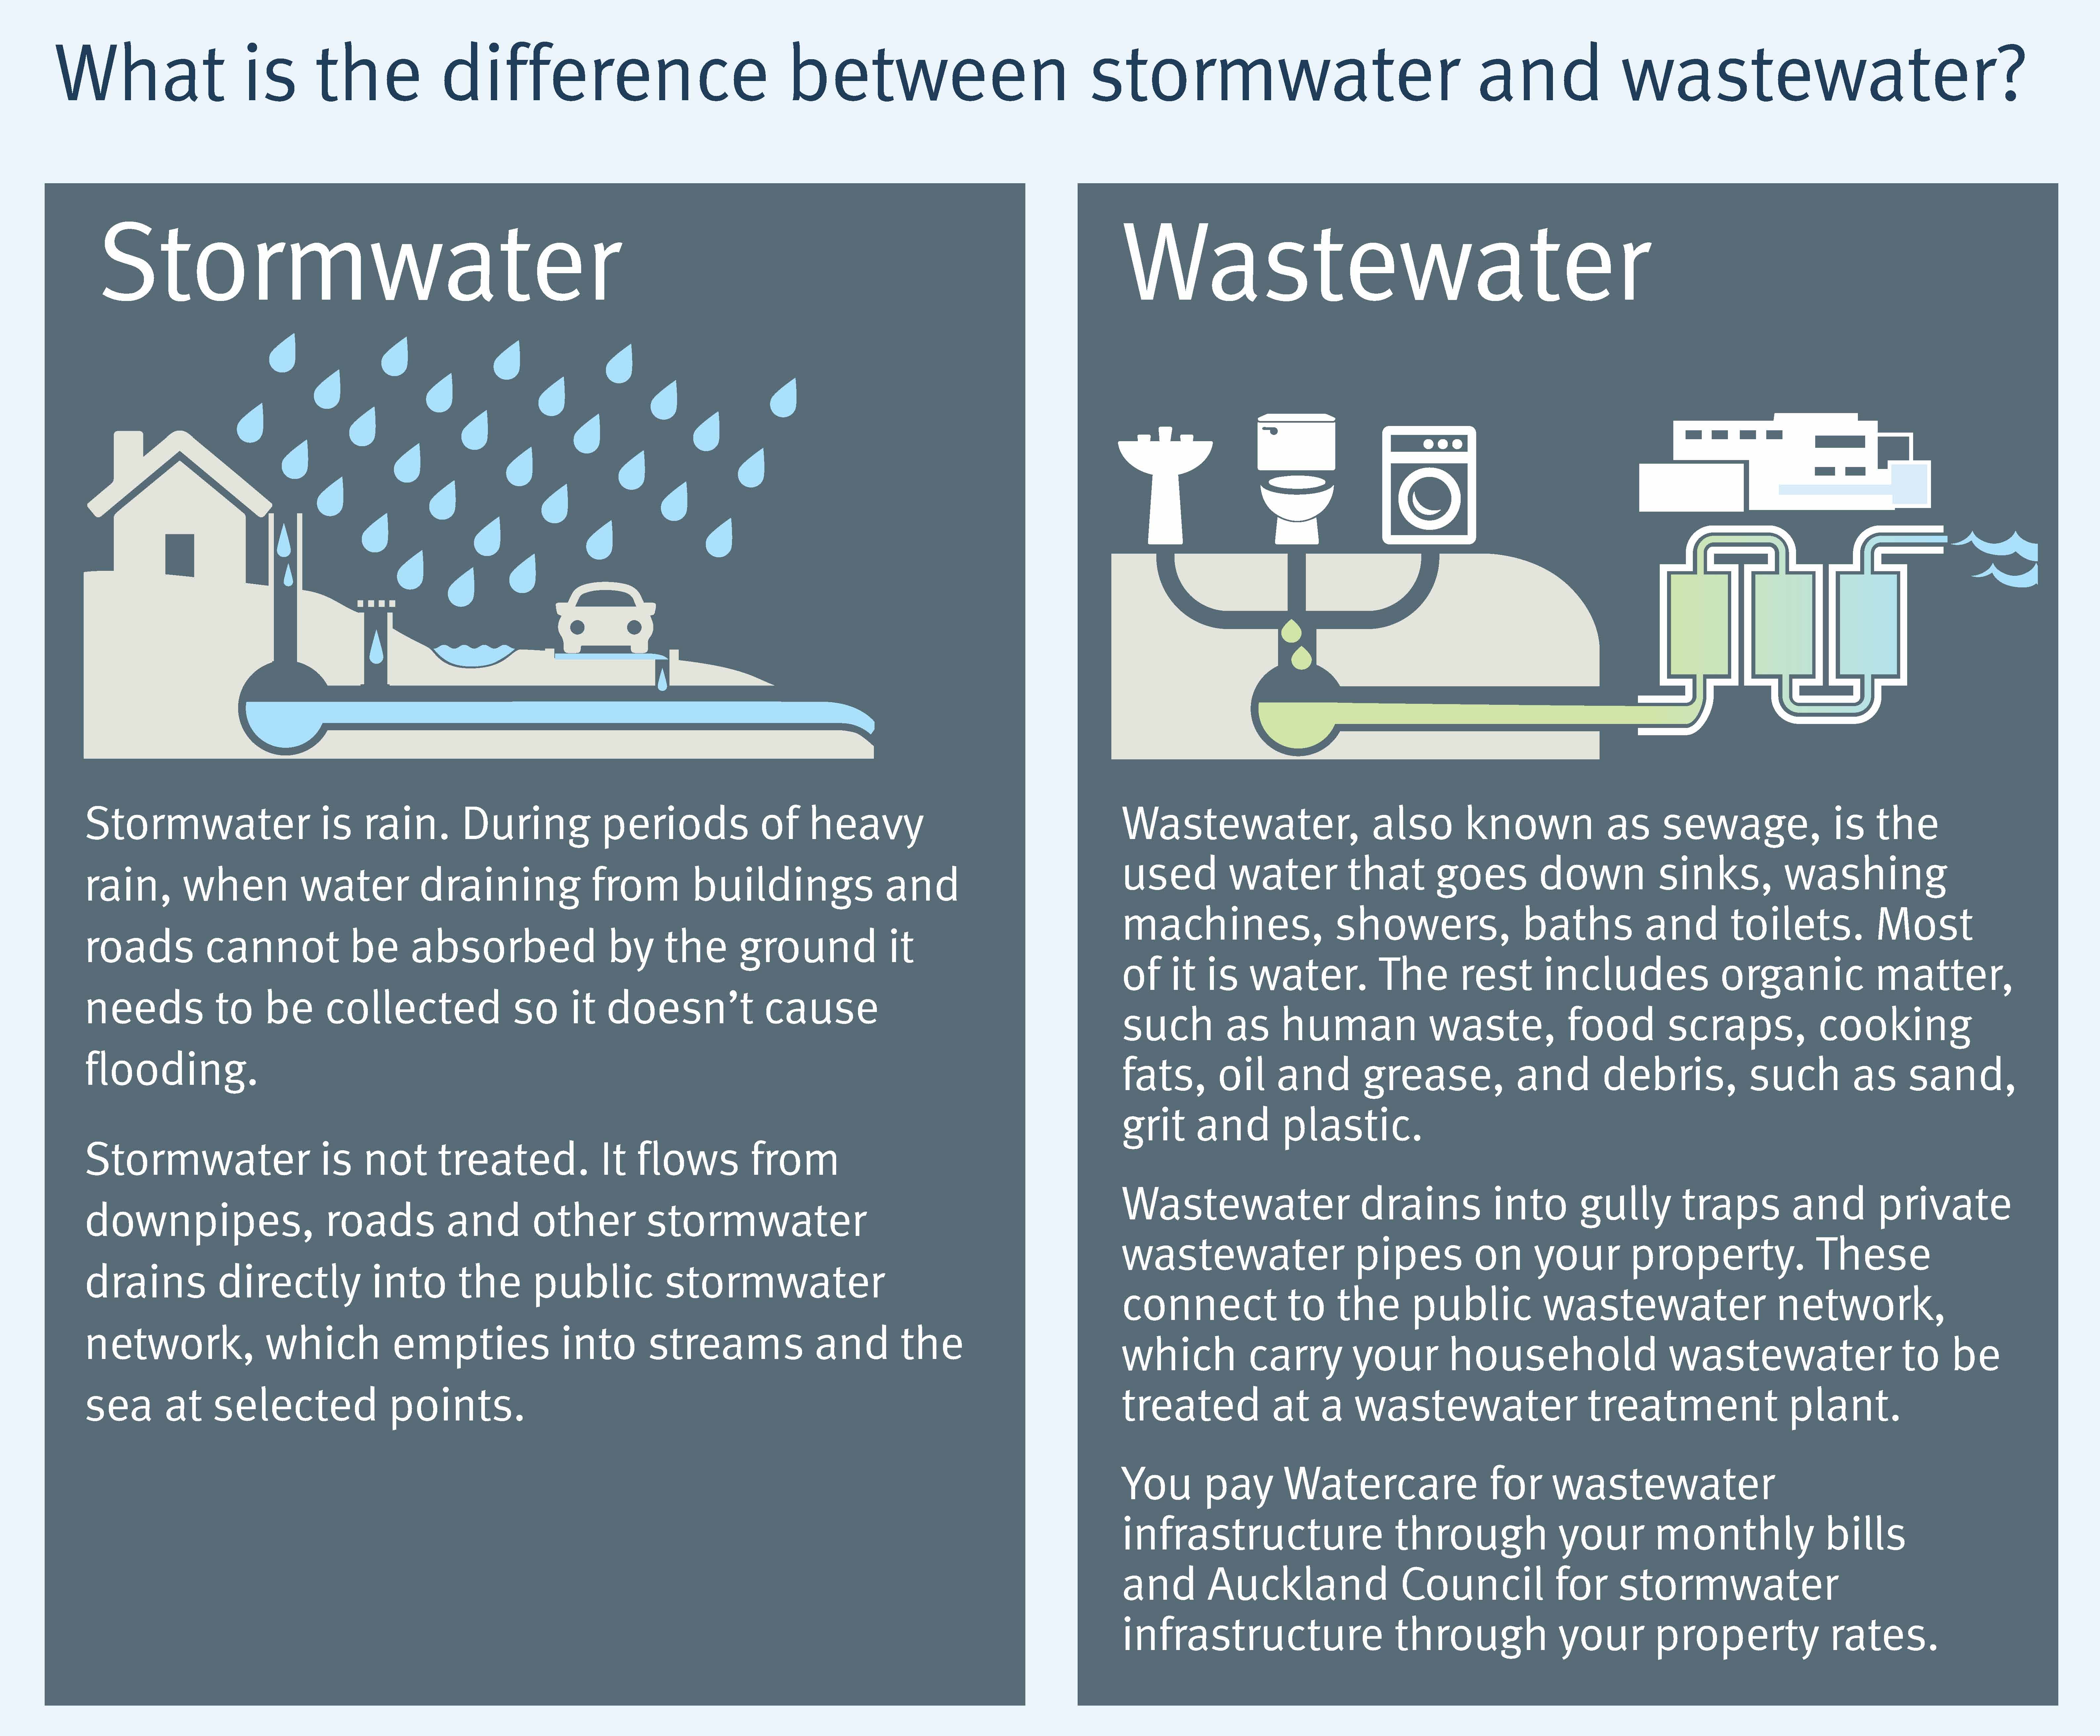 The difference between wastewater and stormwater